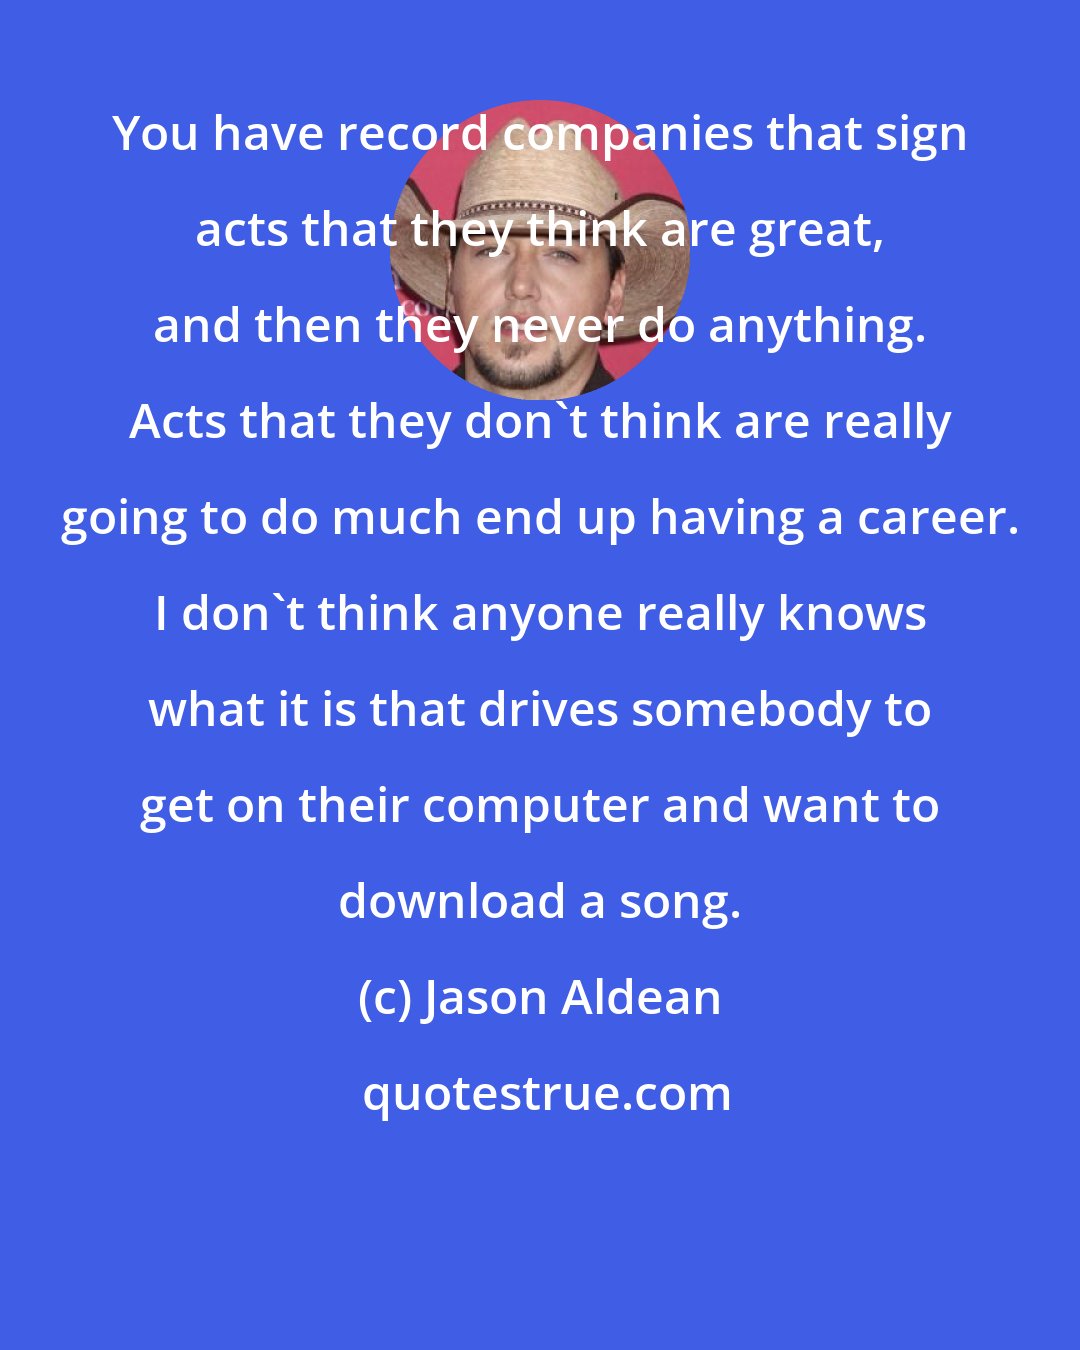 Jason Aldean: You have record companies that sign acts that they think are great, and then they never do anything. Acts that they don't think are really going to do much end up having a career. I don't think anyone really knows what it is that drives somebody to get on their computer and want to download a song.